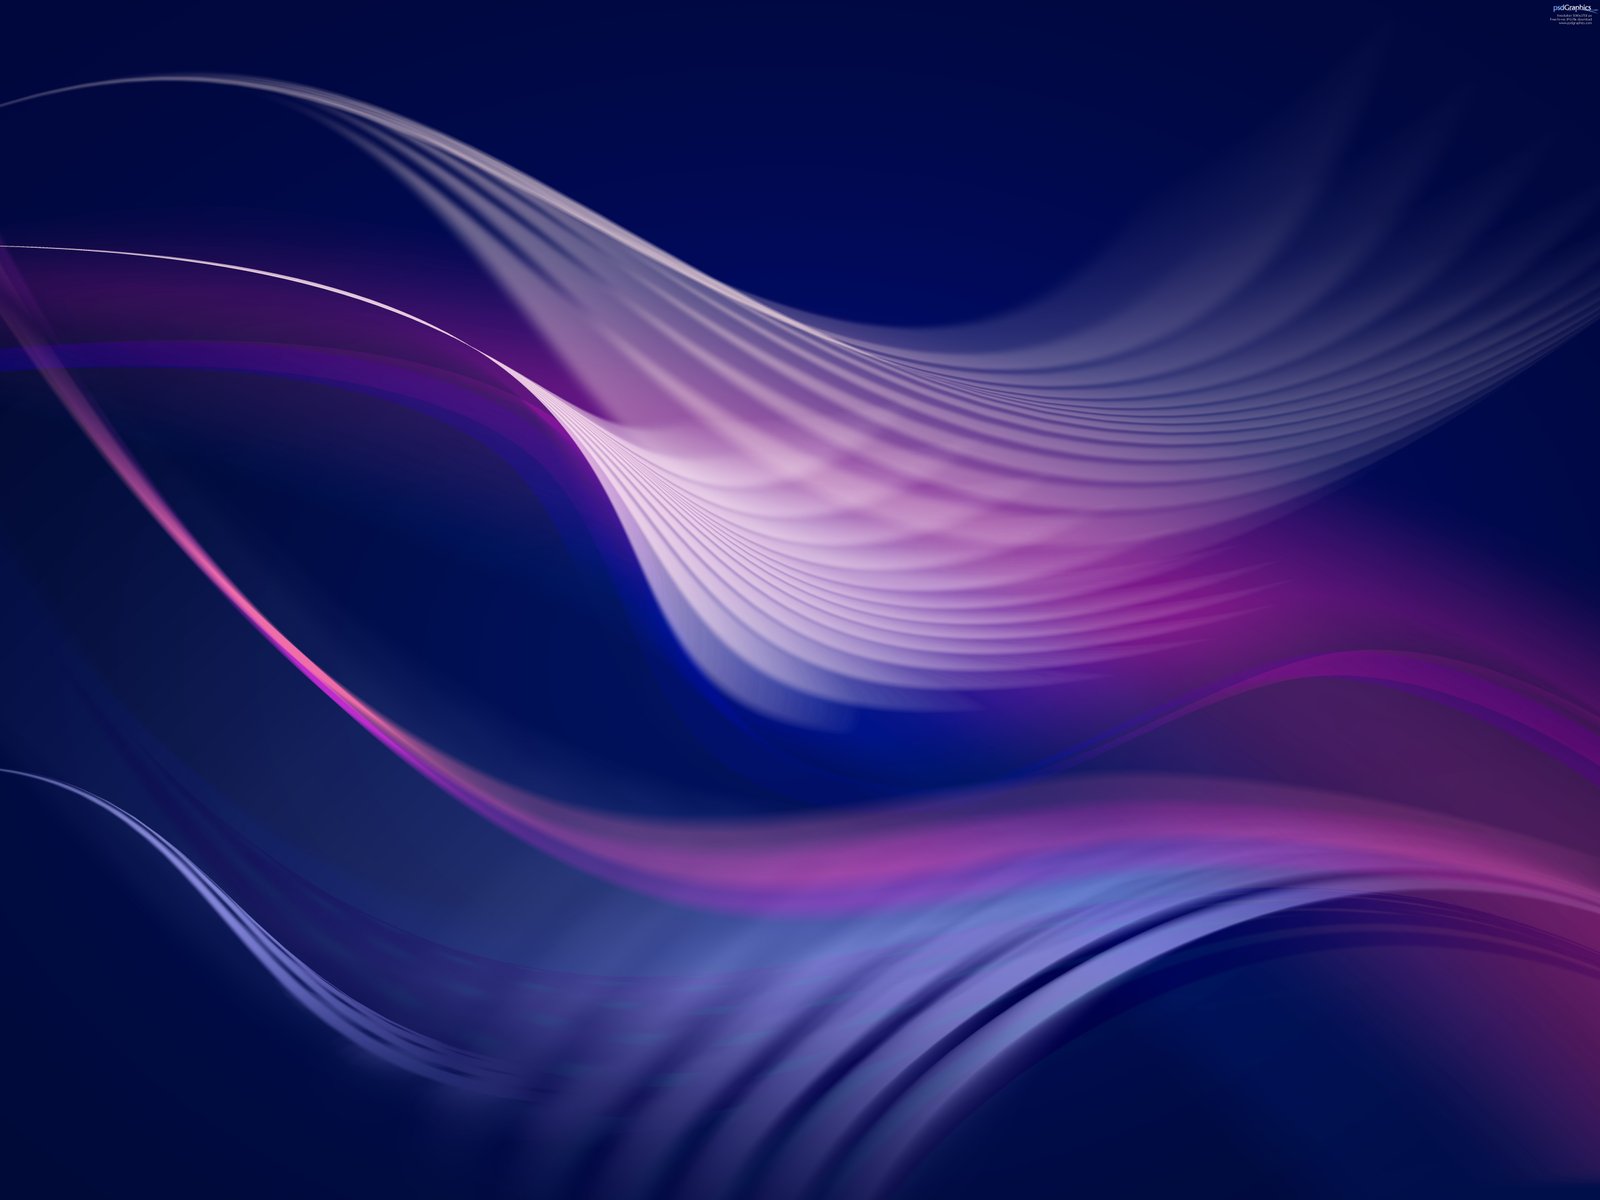 light purple and blue background